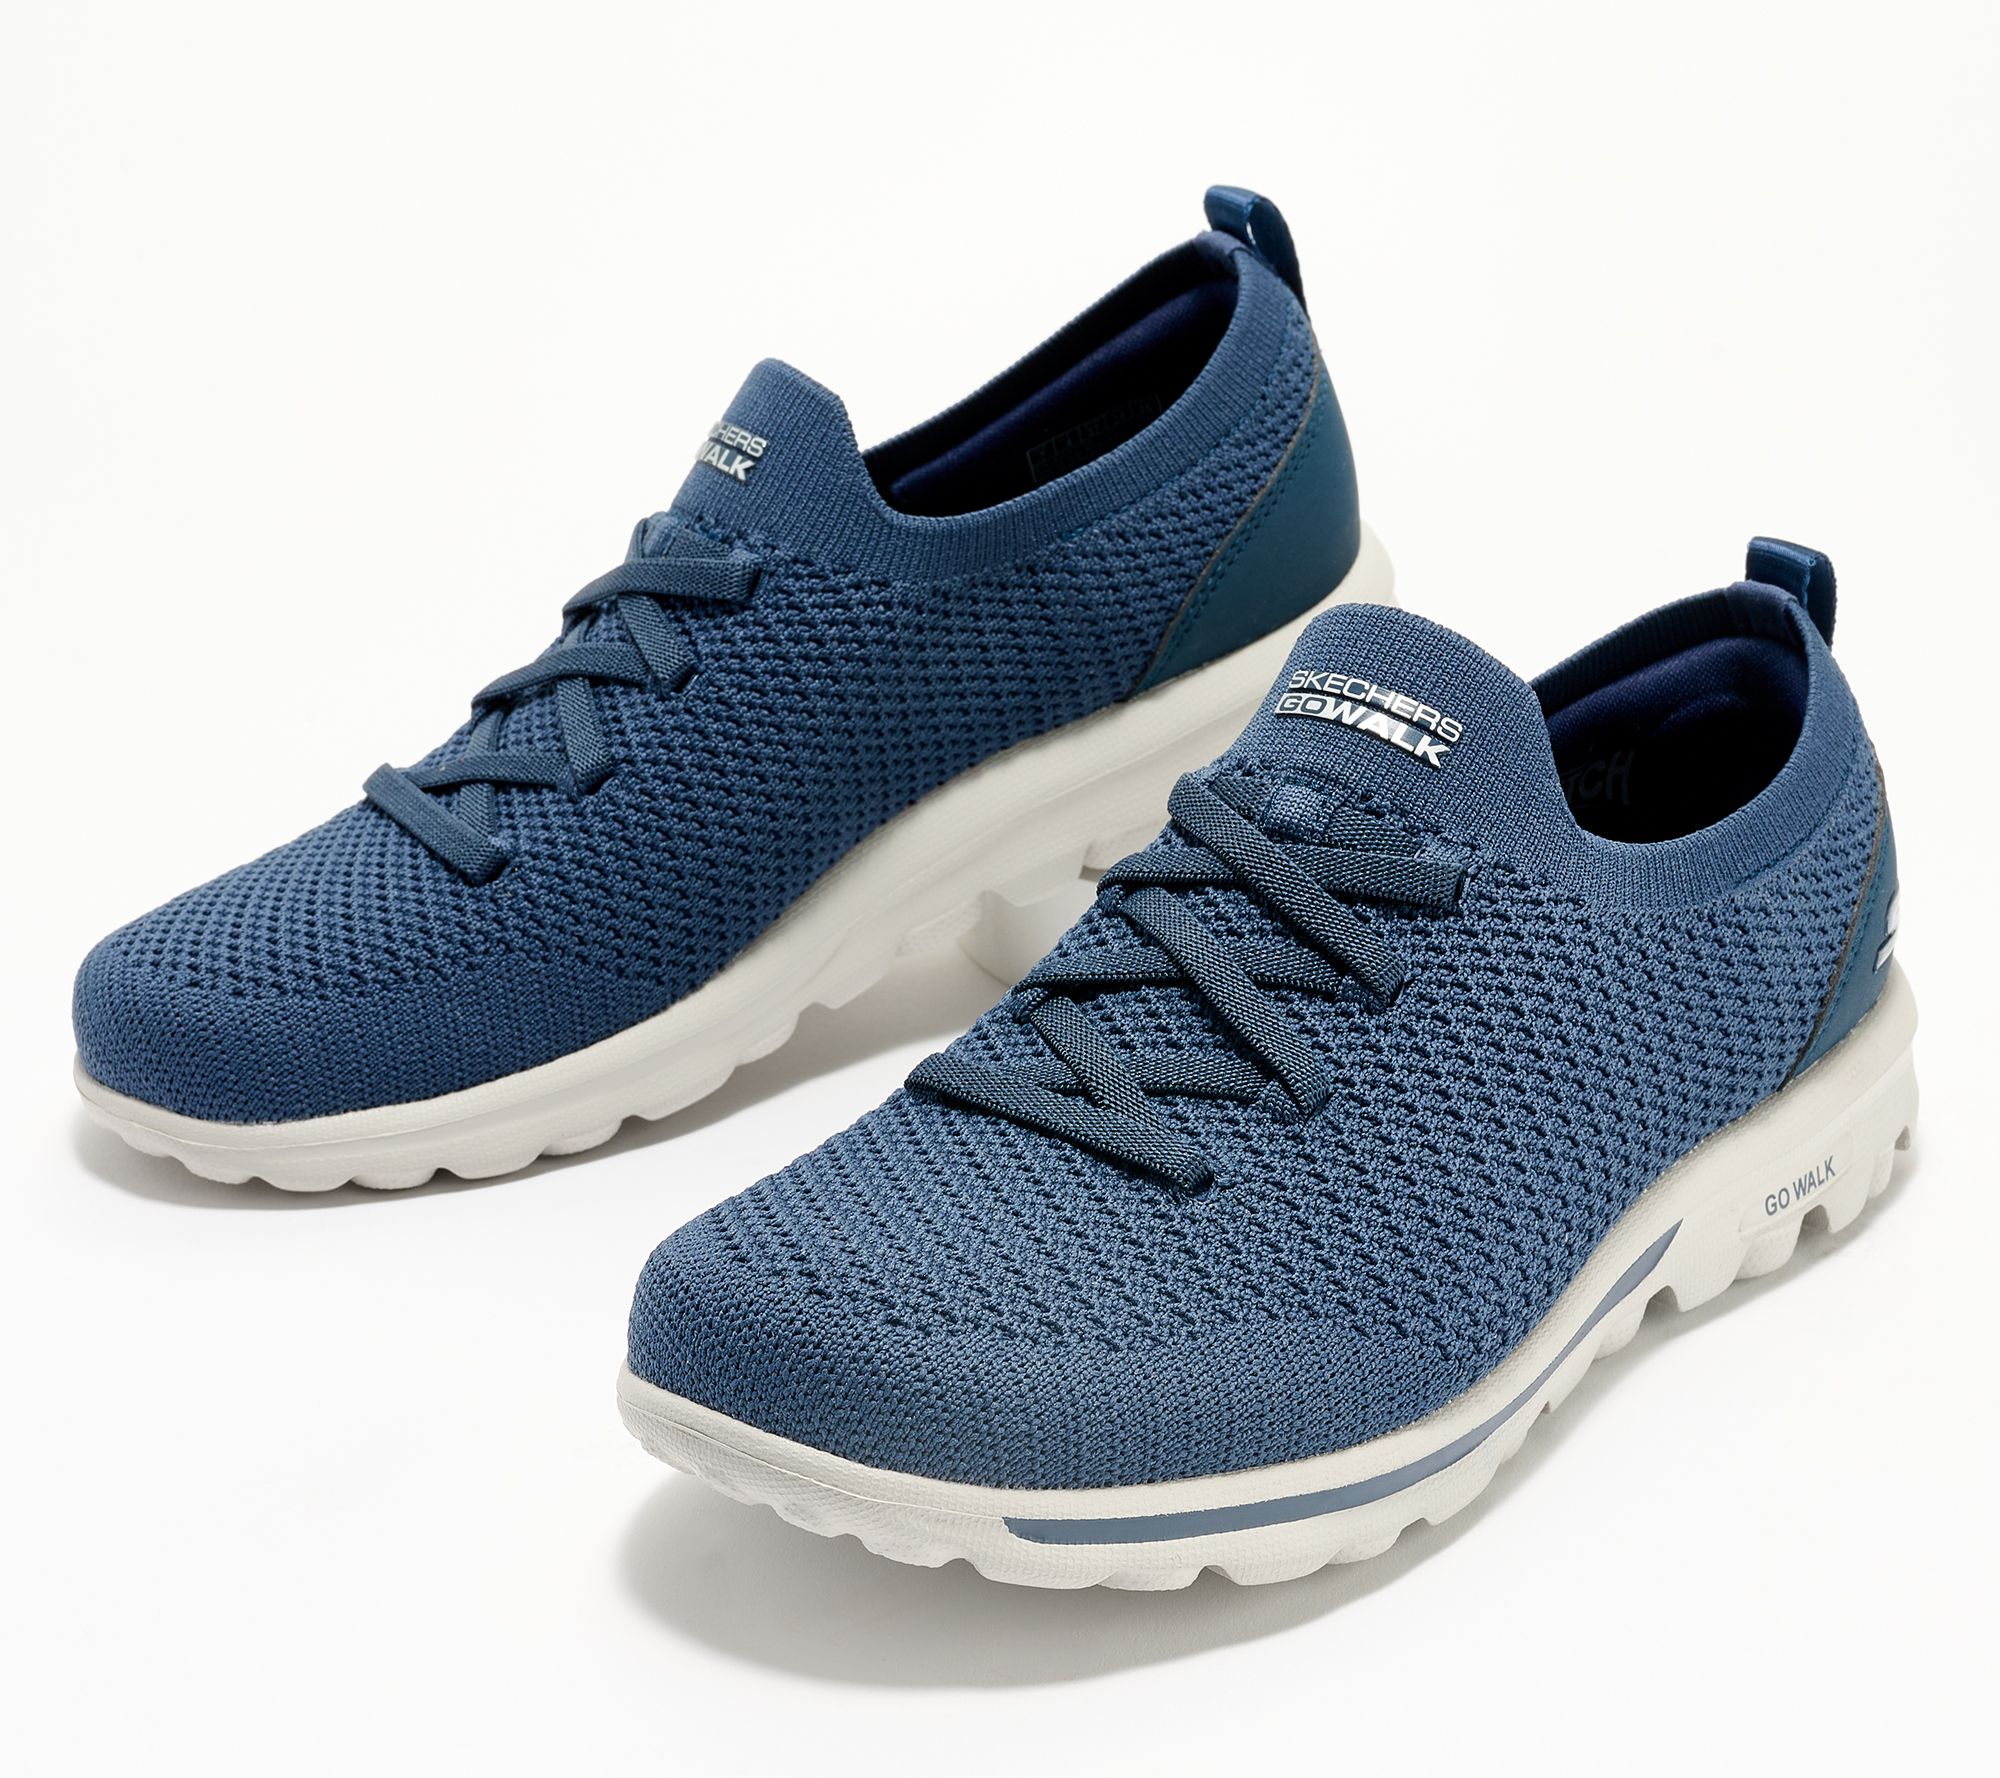 Skechers sale: Save up to 30% on sneakers at QVC